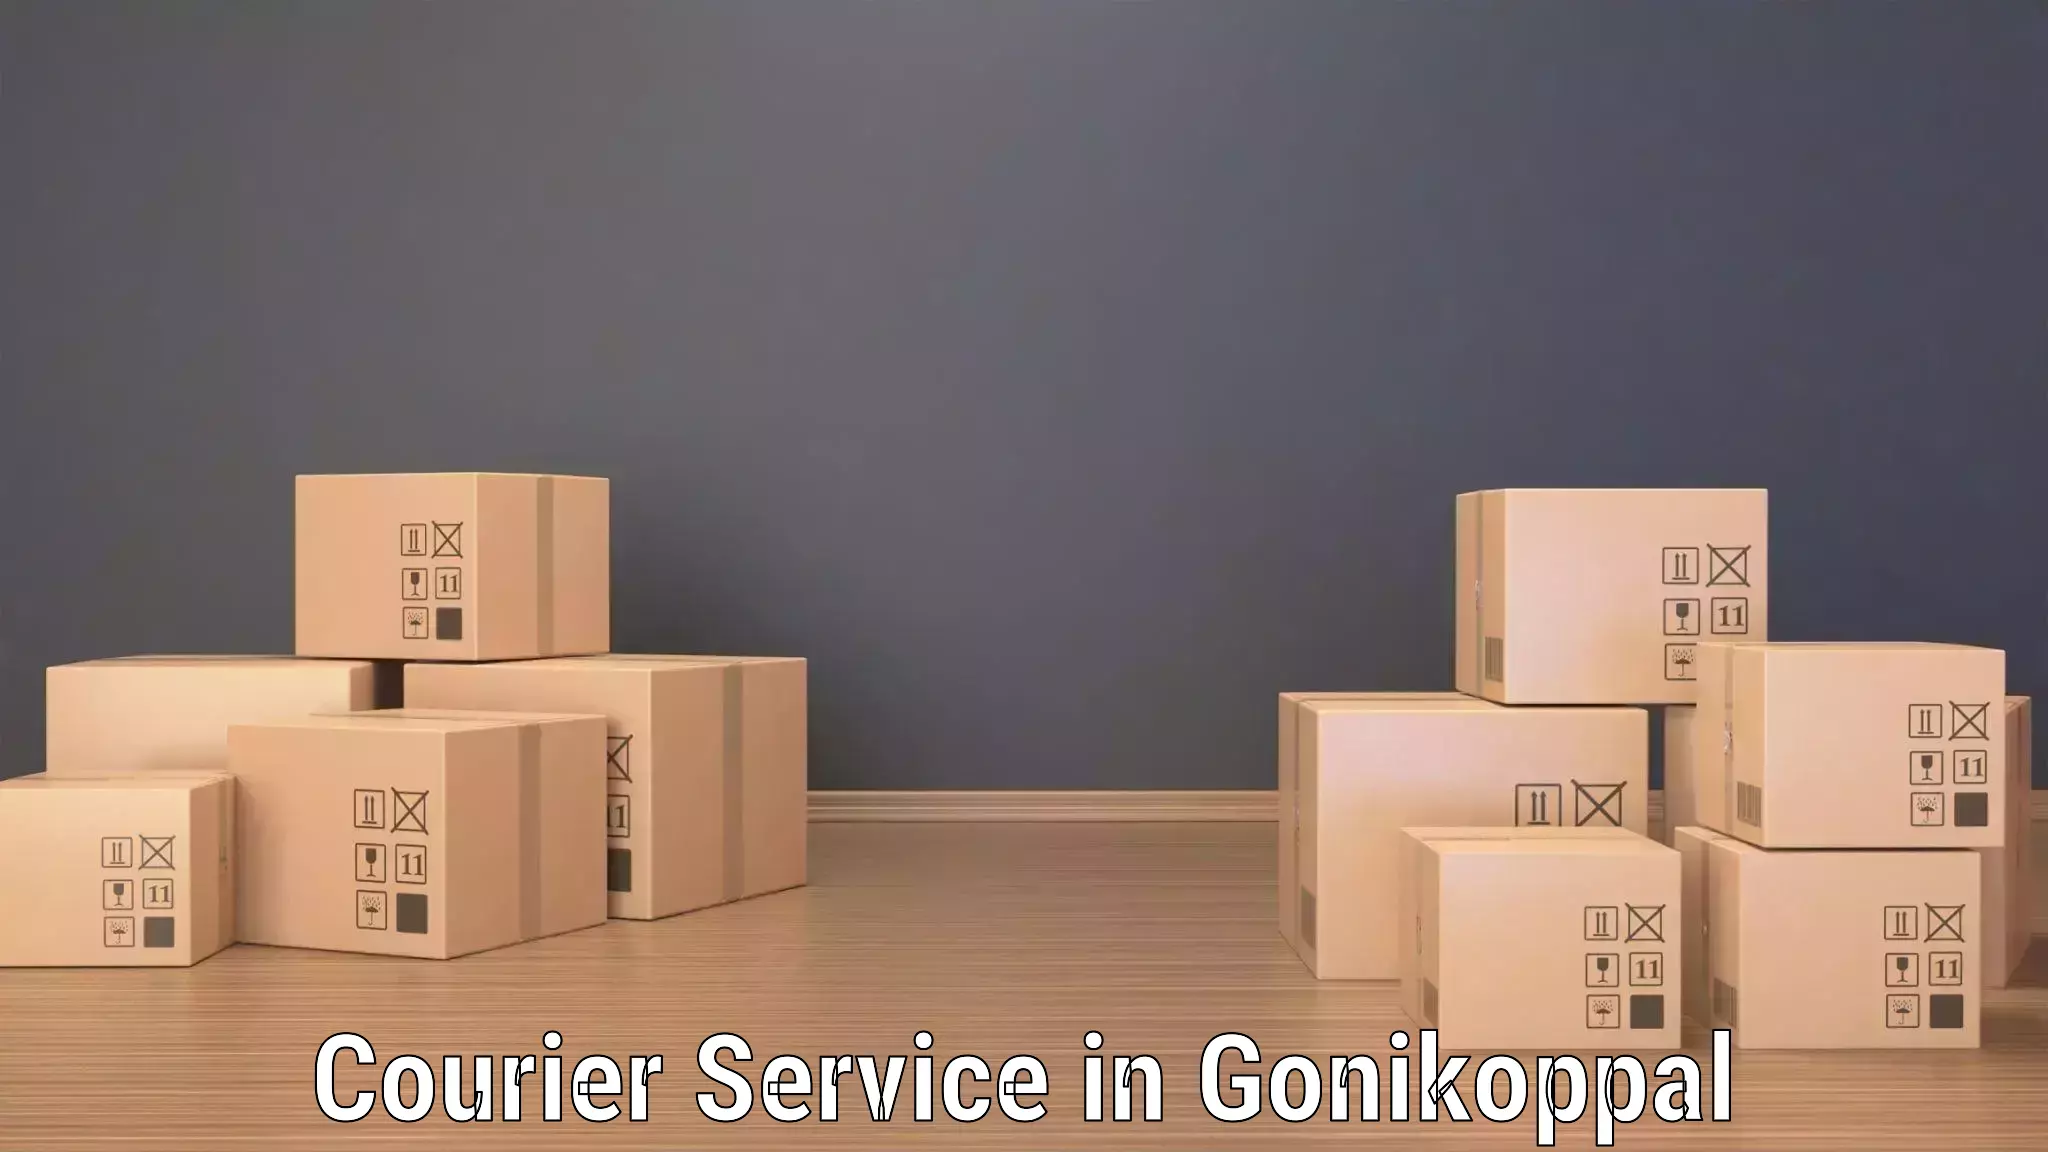 Efficient courier operations in Gonikoppal